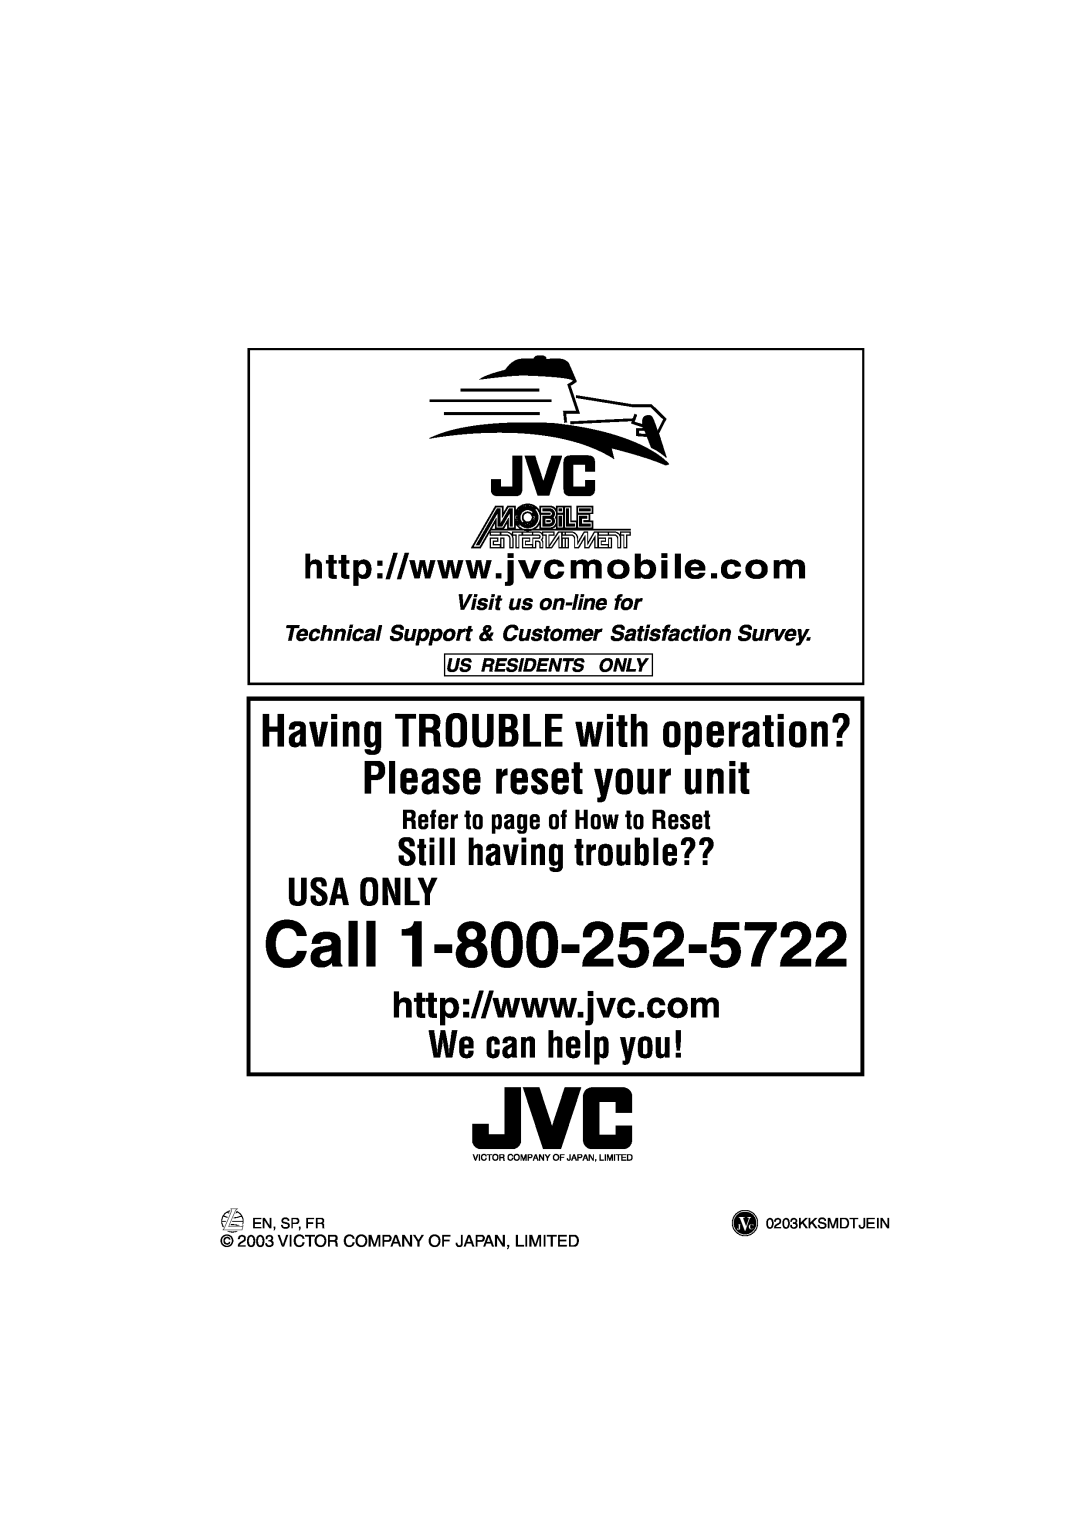 JVC KD-LH1150 Refer to page of How to Reset, Visit us on-linefor, Technical Support & Customer Satisfaction Survey, Call 